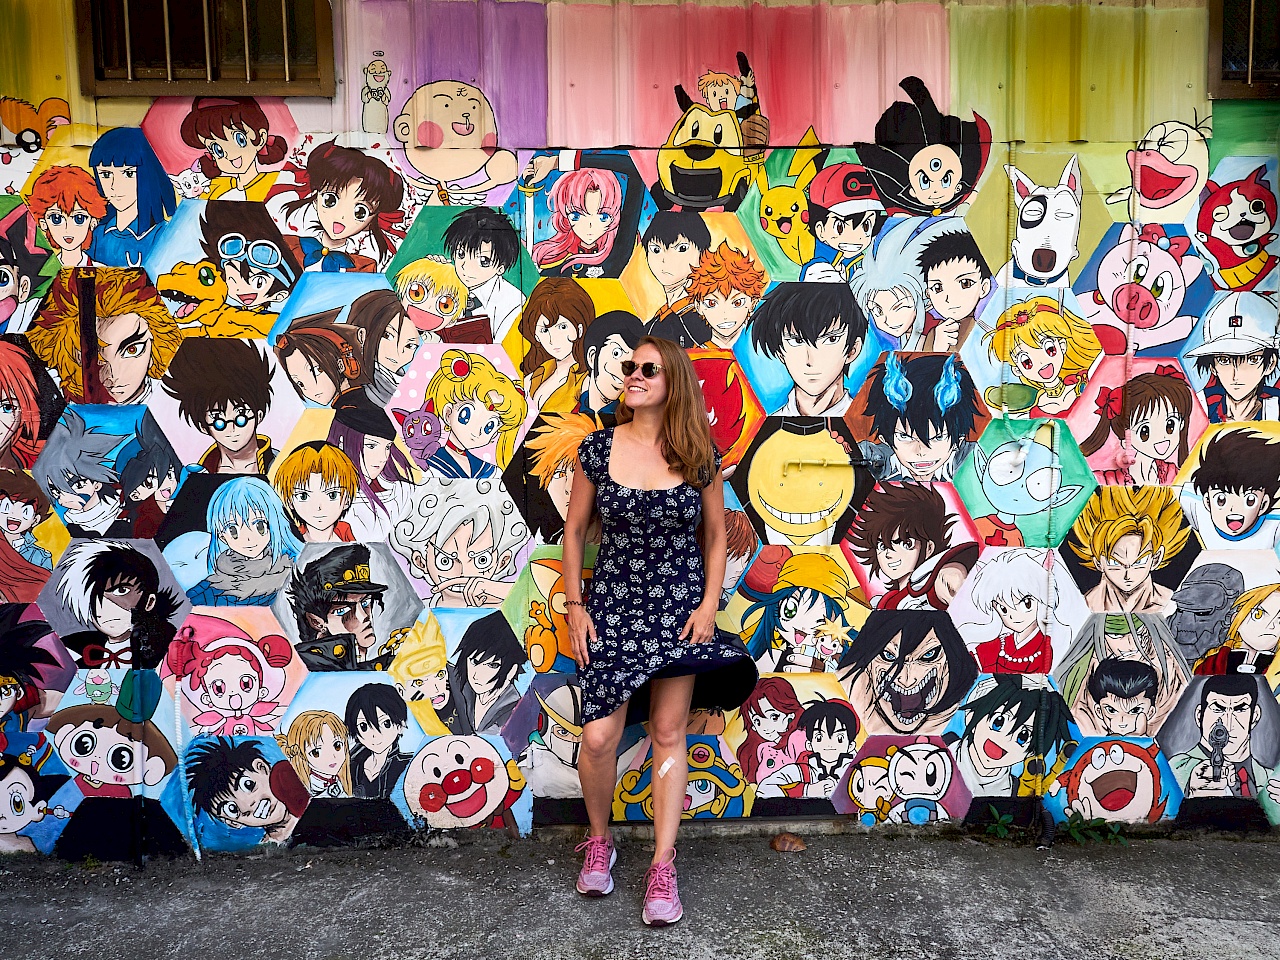 Anime-Wand in der Painted Animation Lane in Taichung (Taiwan)